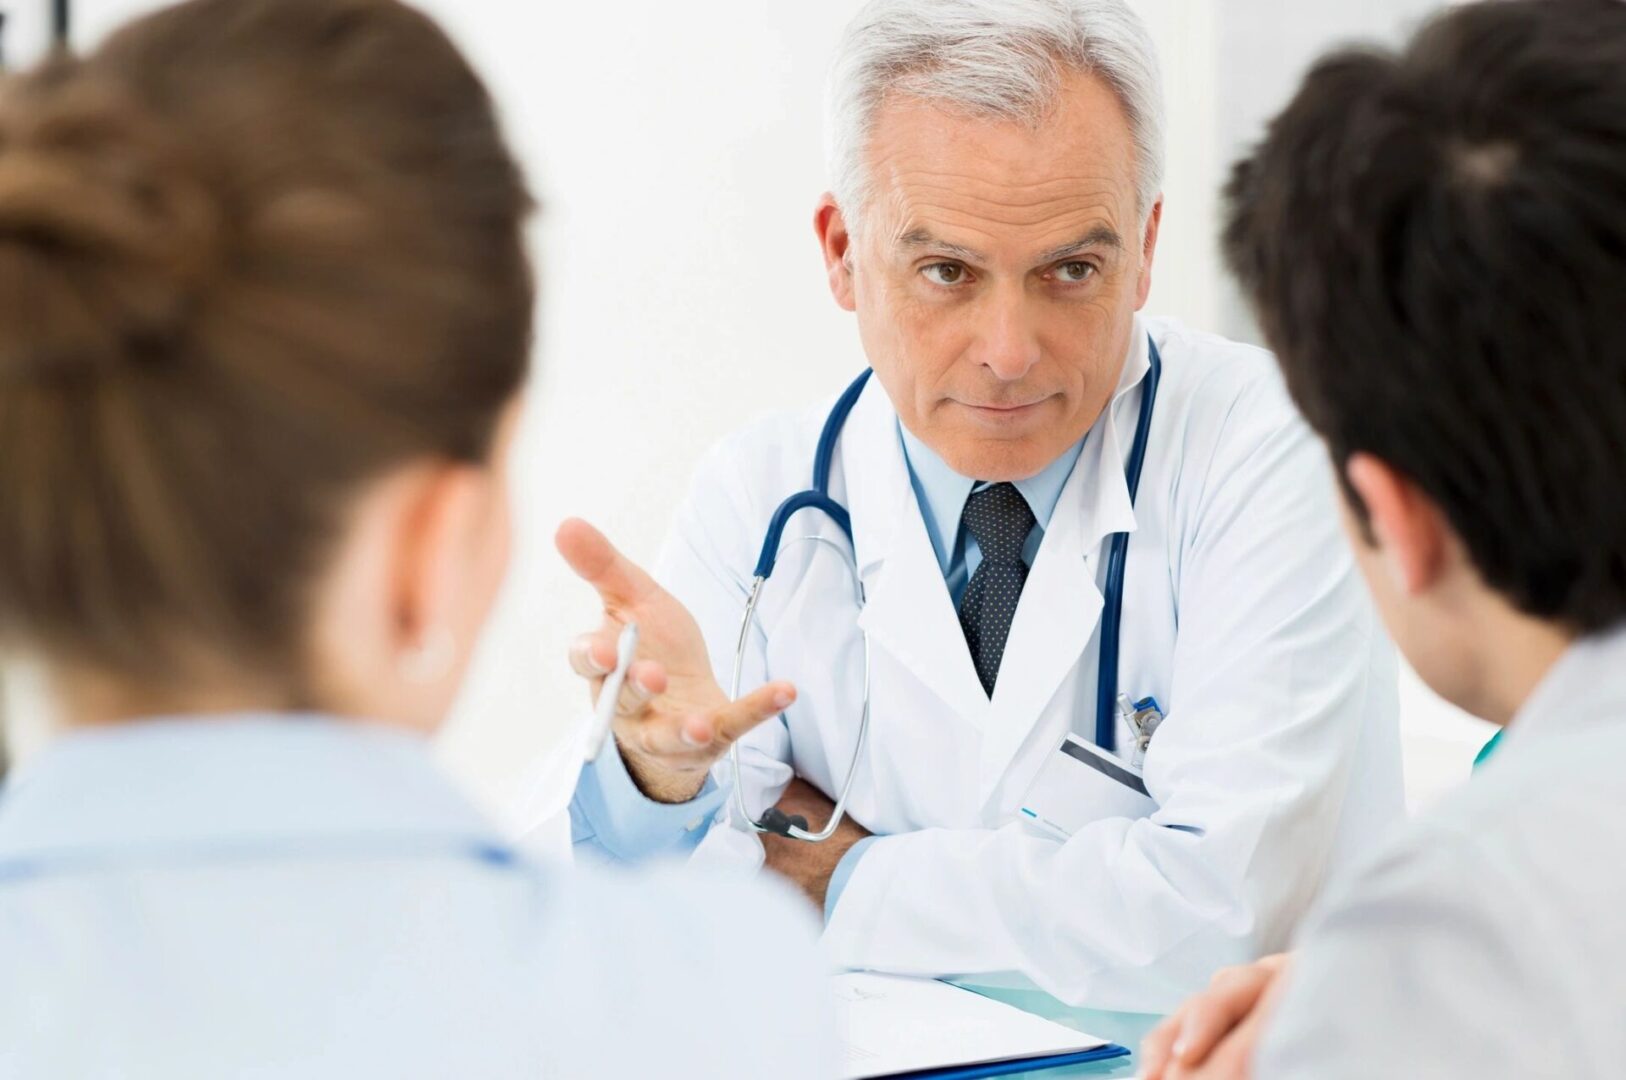 A doctor is talking to two other doctors.